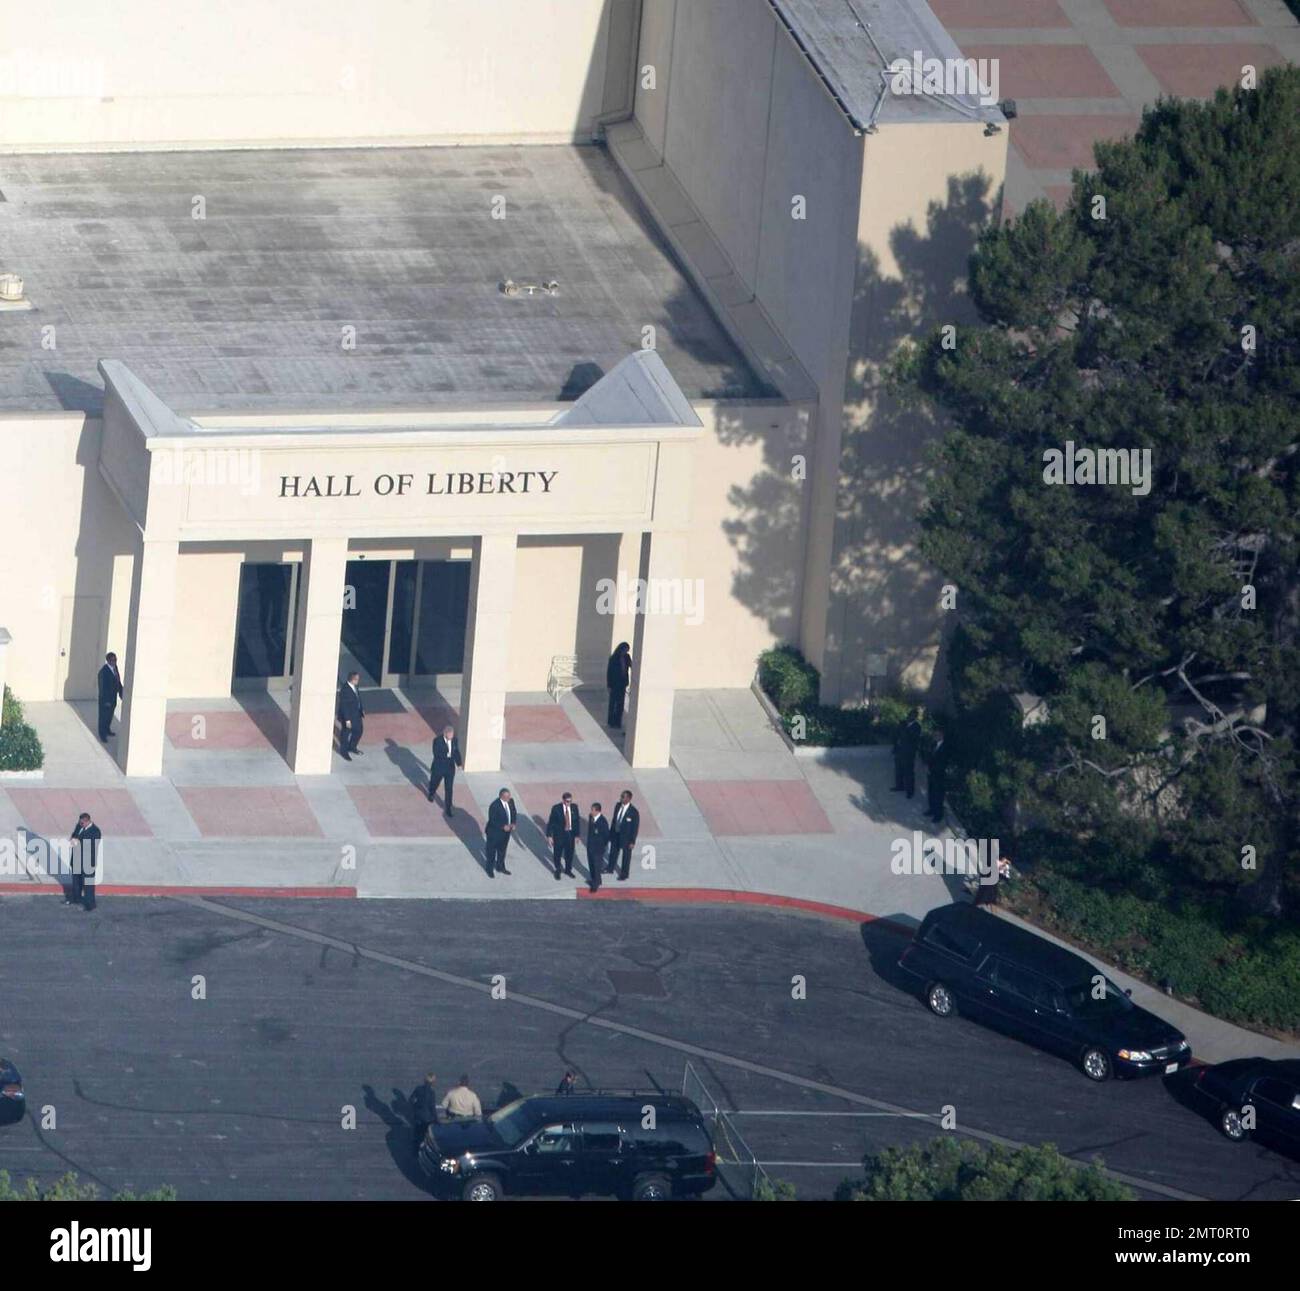 Aerial views of Forest Lawn Cemetery  where Michael Jackson's private funeral was held. Guests arrived for the service and the casket was loaded into a hearse before the motorcade started it's journey to the Staples Center memorial.  Los Angeles, CA 7/7/09     . Stock Photo